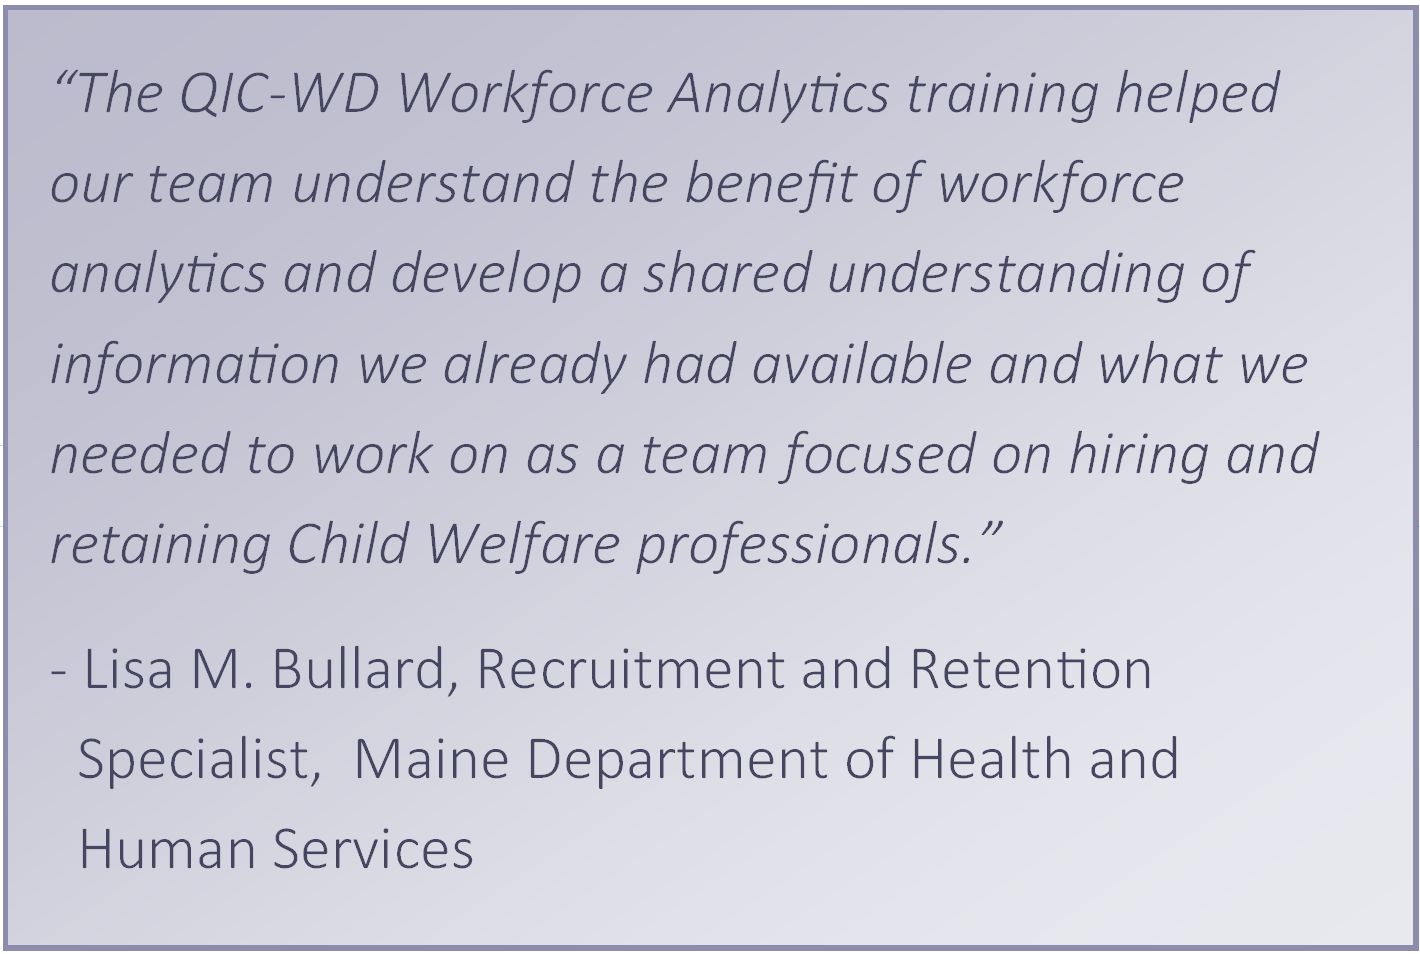 “The QIC-WD Workforce Analytics training helped our team understand the benefit of workforce analytics and develop a shared understanding of information we already had available and what we needed to work on as a team focused on hiring and retaining Child